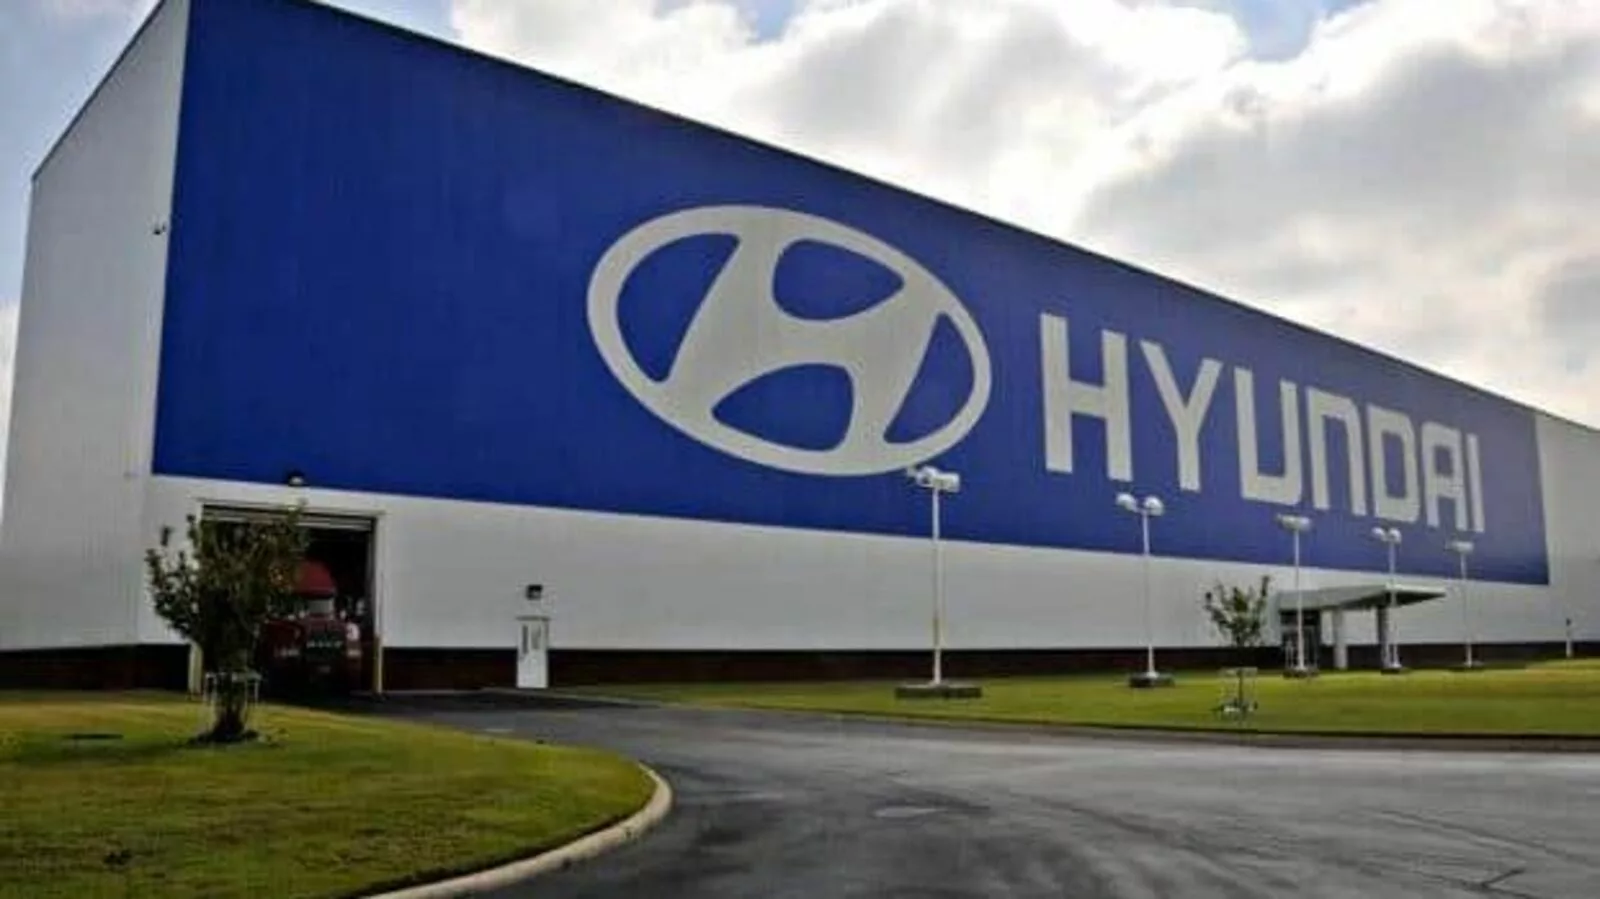 Hyundai seeks expansion, higher valuation with India IPO